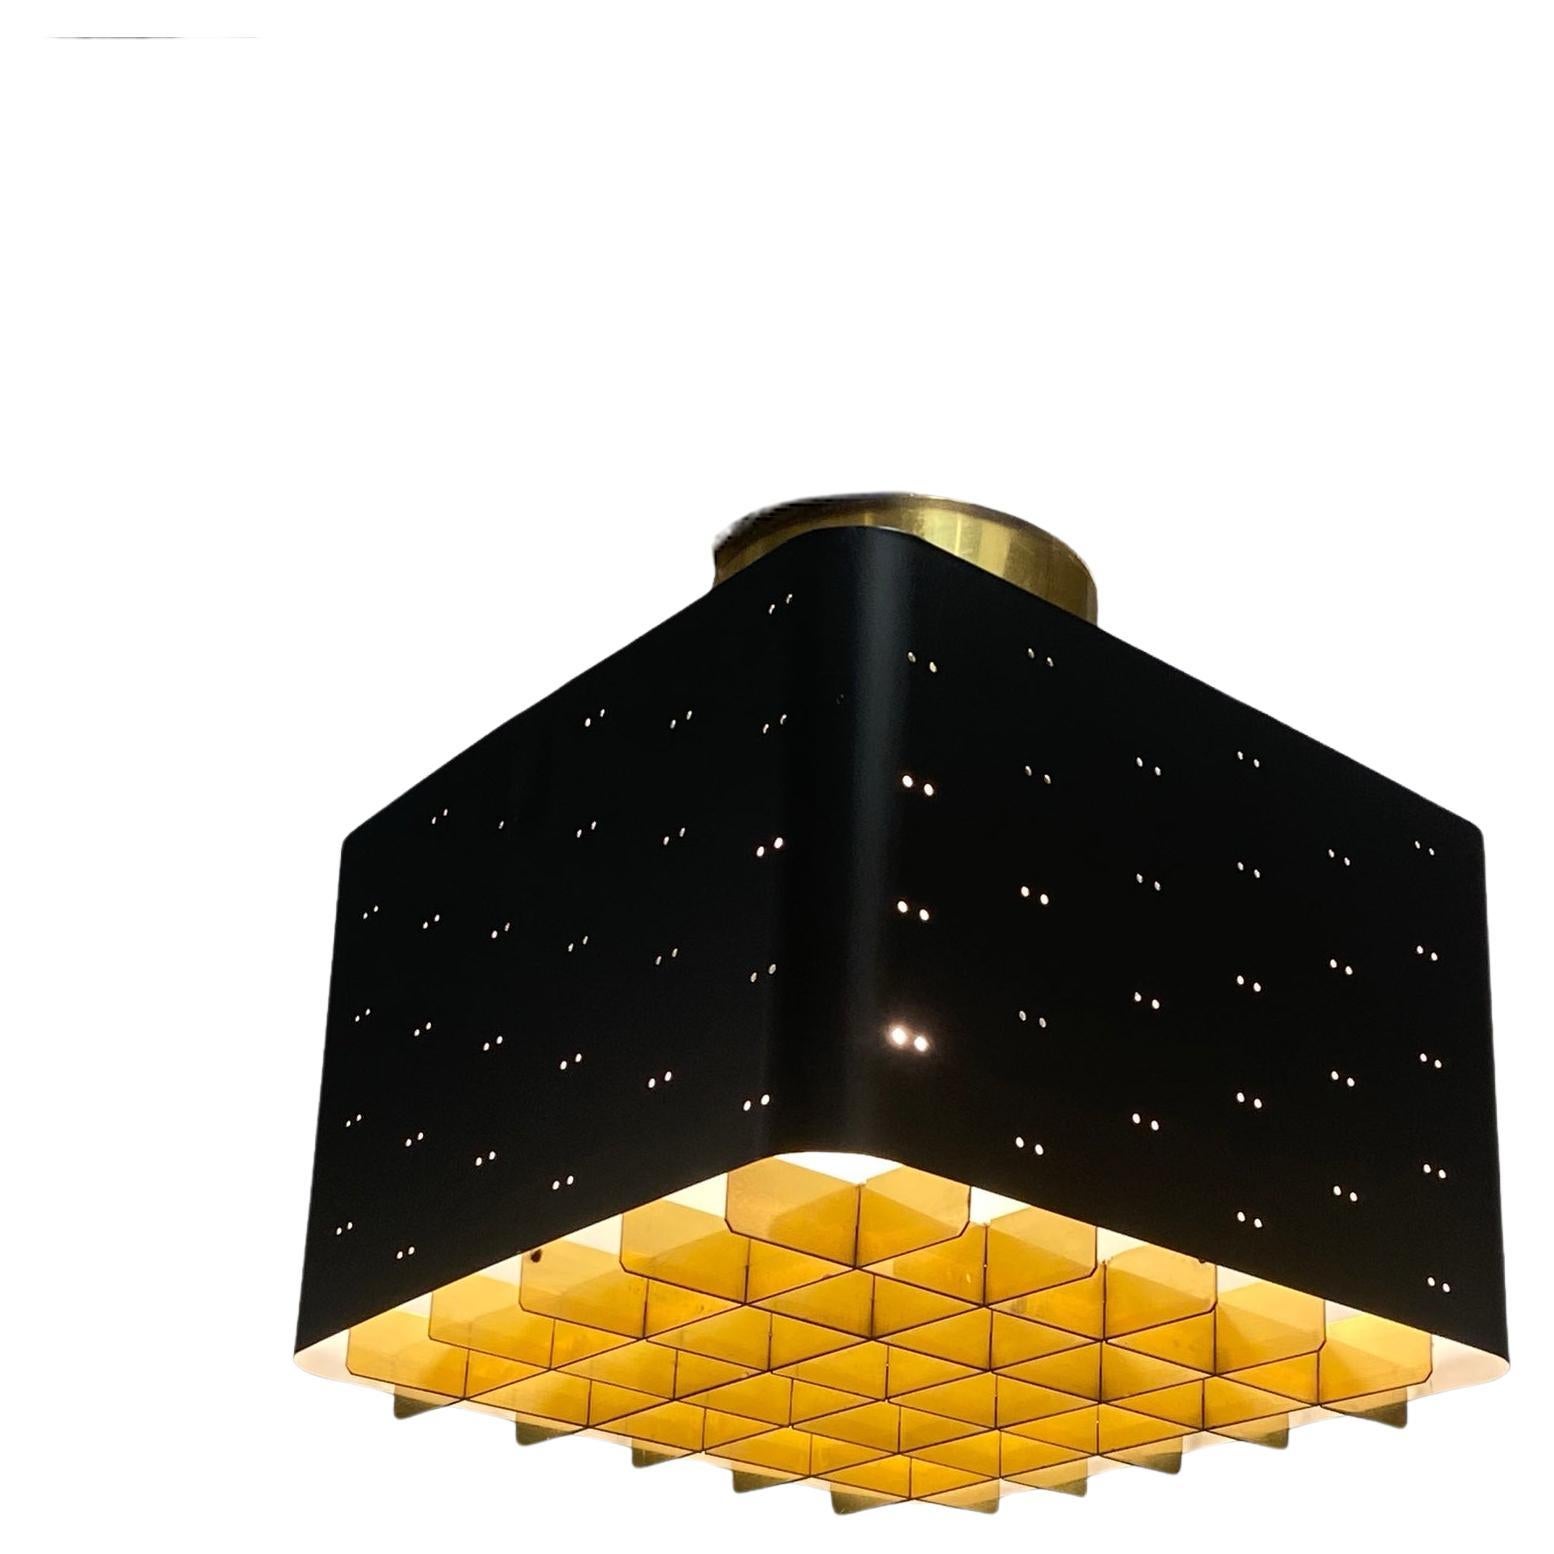 Paavo Tynell "Starry Sky" Ceiling Lamp 9068 in Black For Sale